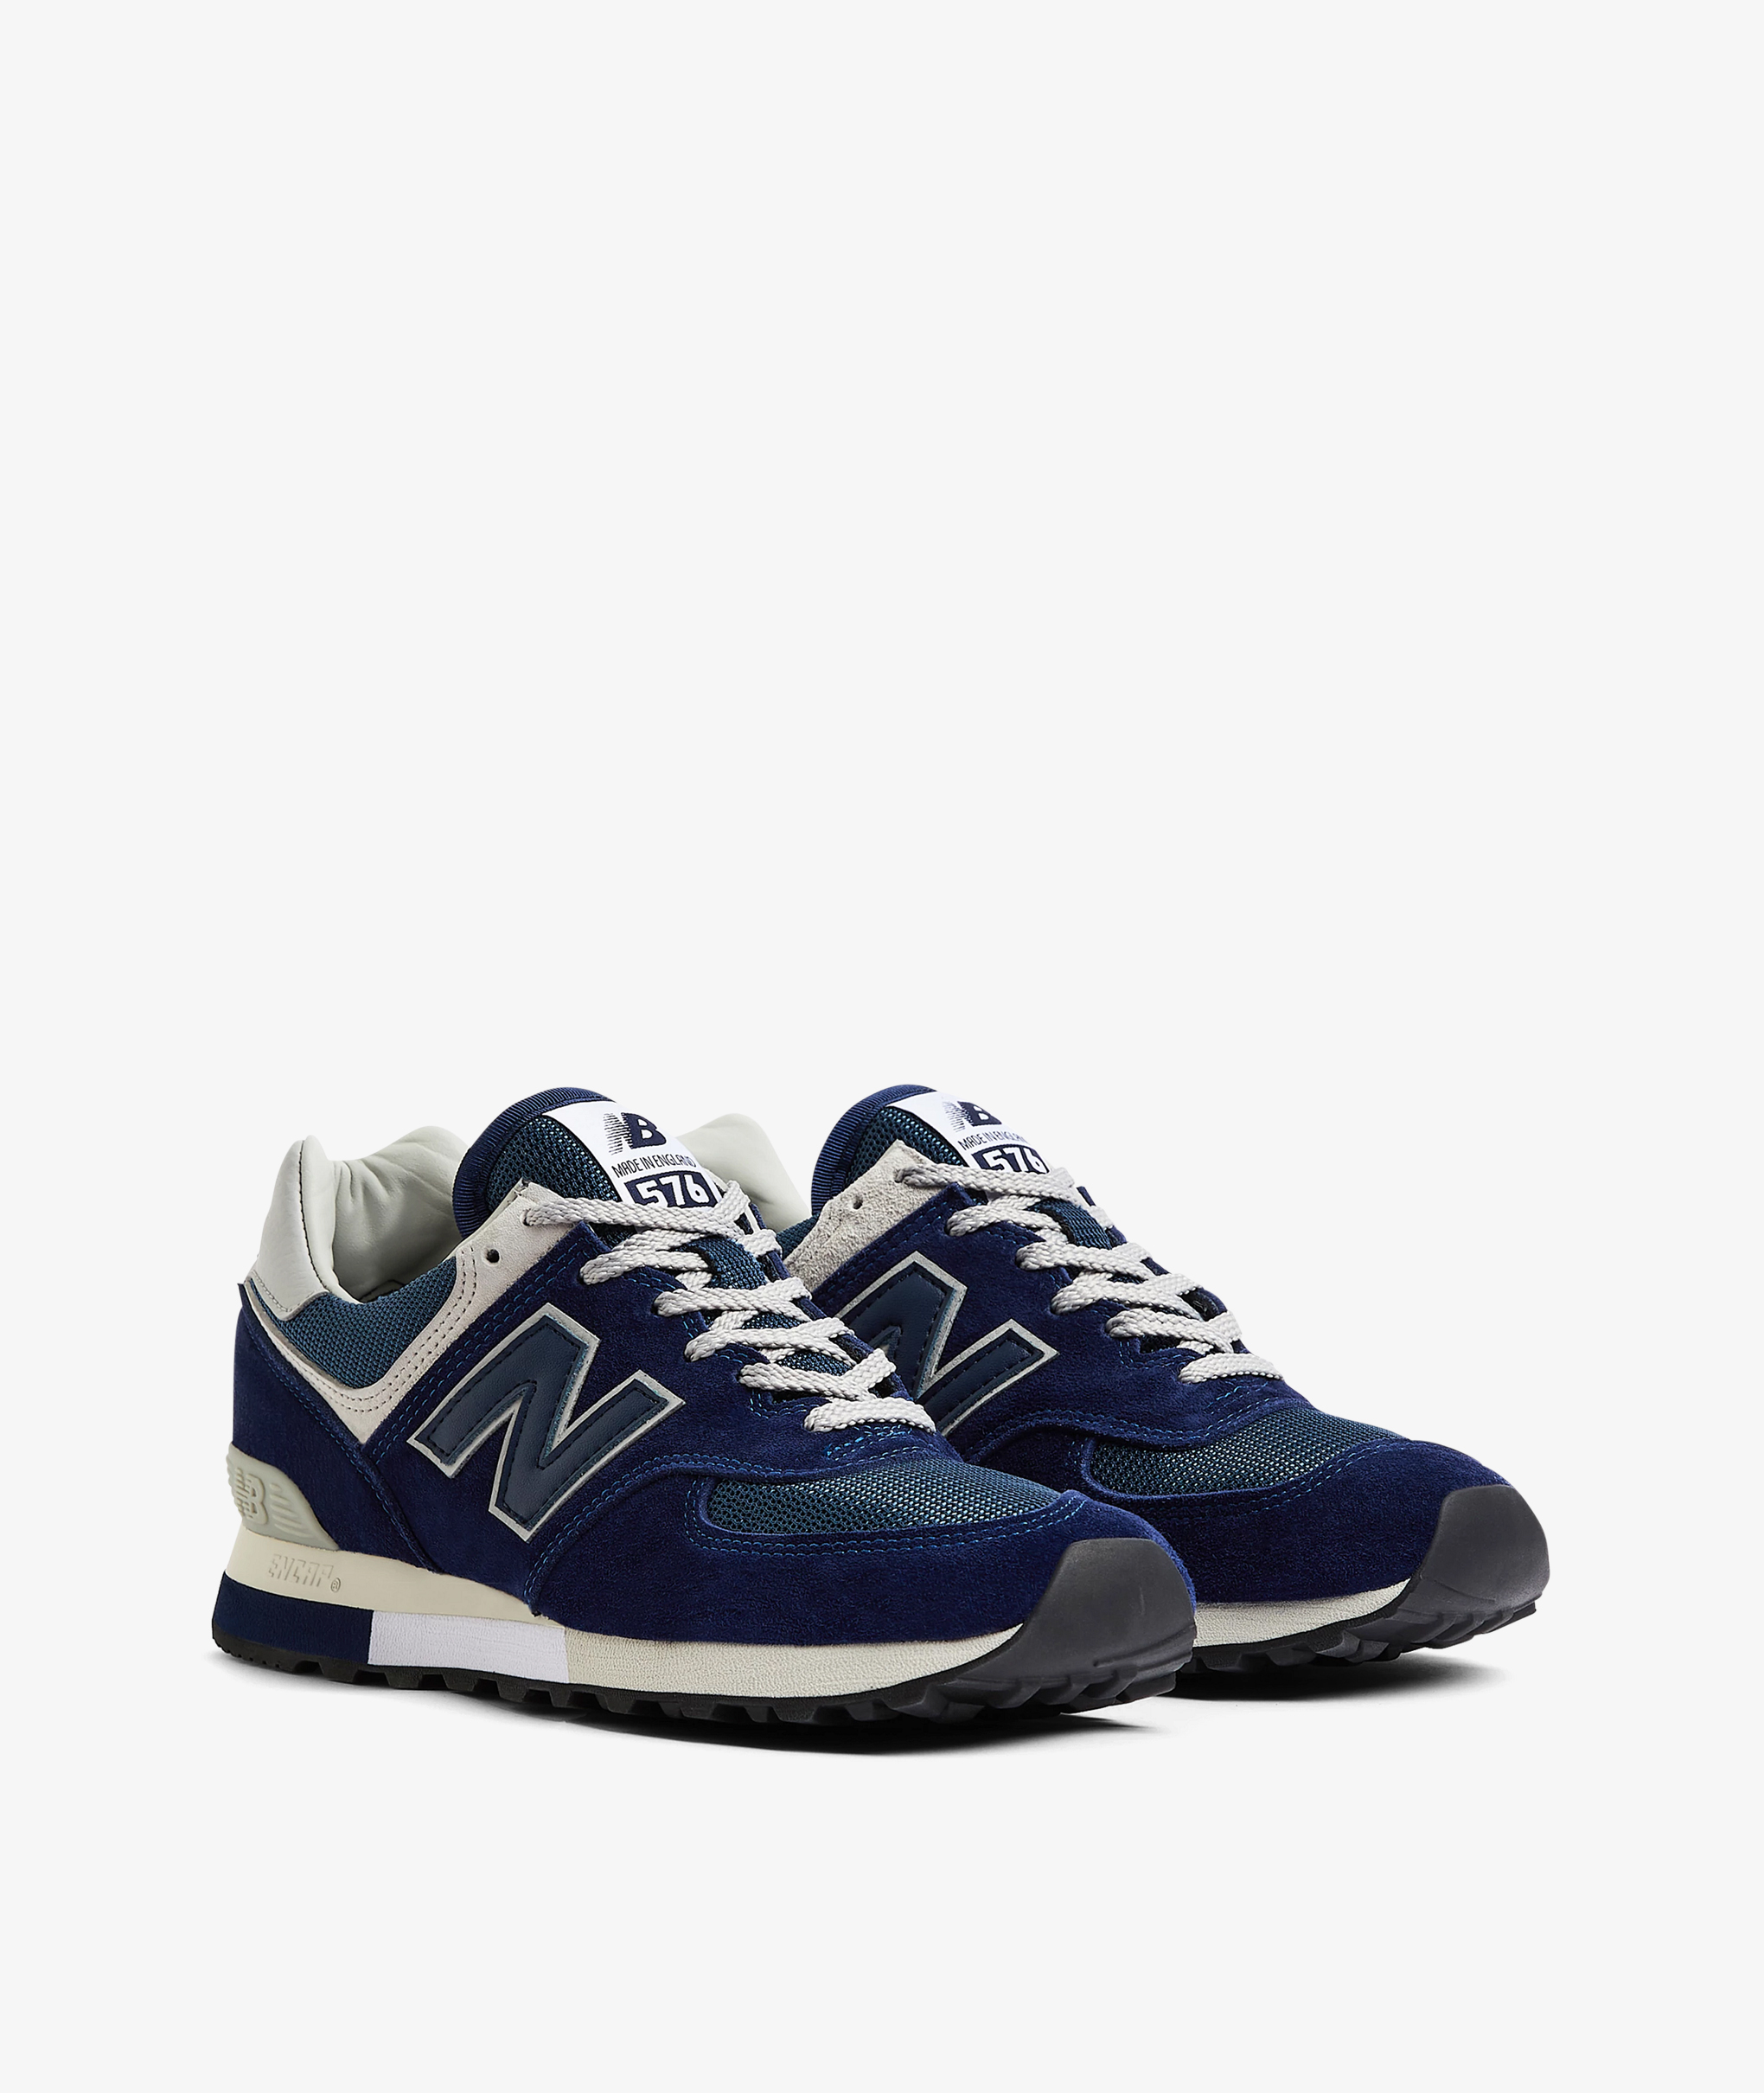 Norse Store | Shipping Worldwide - New Balance OU576ANN - MEDIEVAL  BLUE/INSIGNIA BLUE